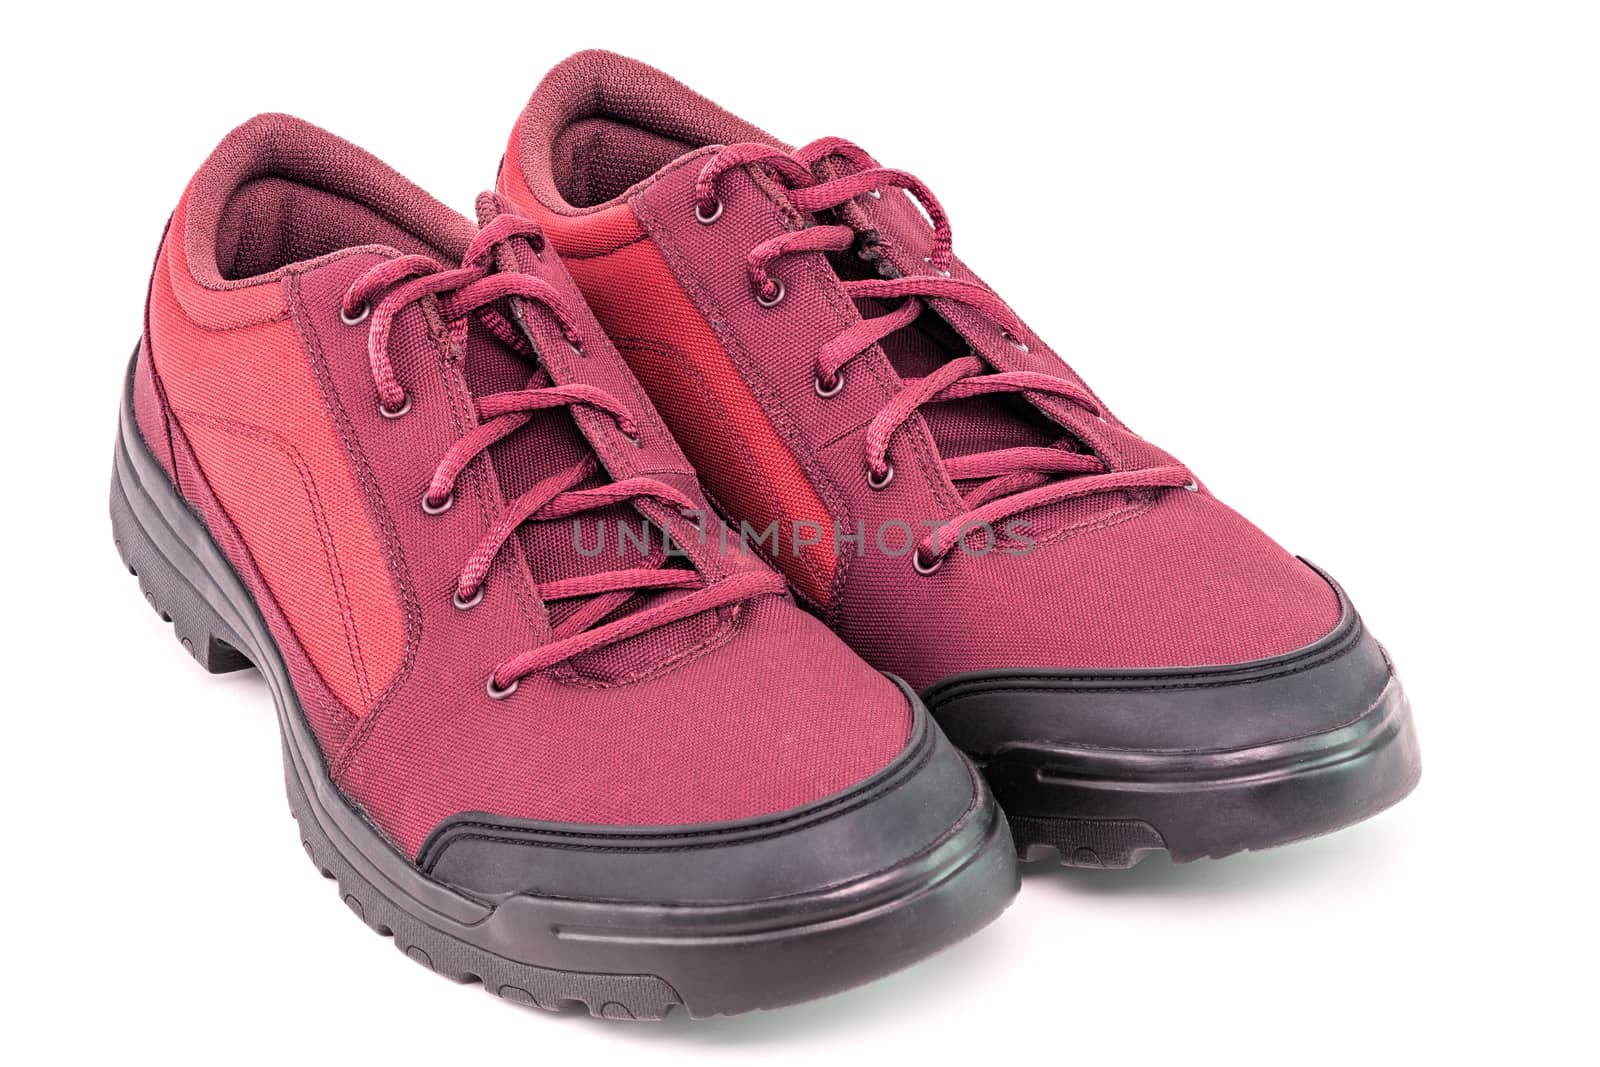 a pair of cheap cheap red hiking shoes isolated on white background - perspective close-up view.